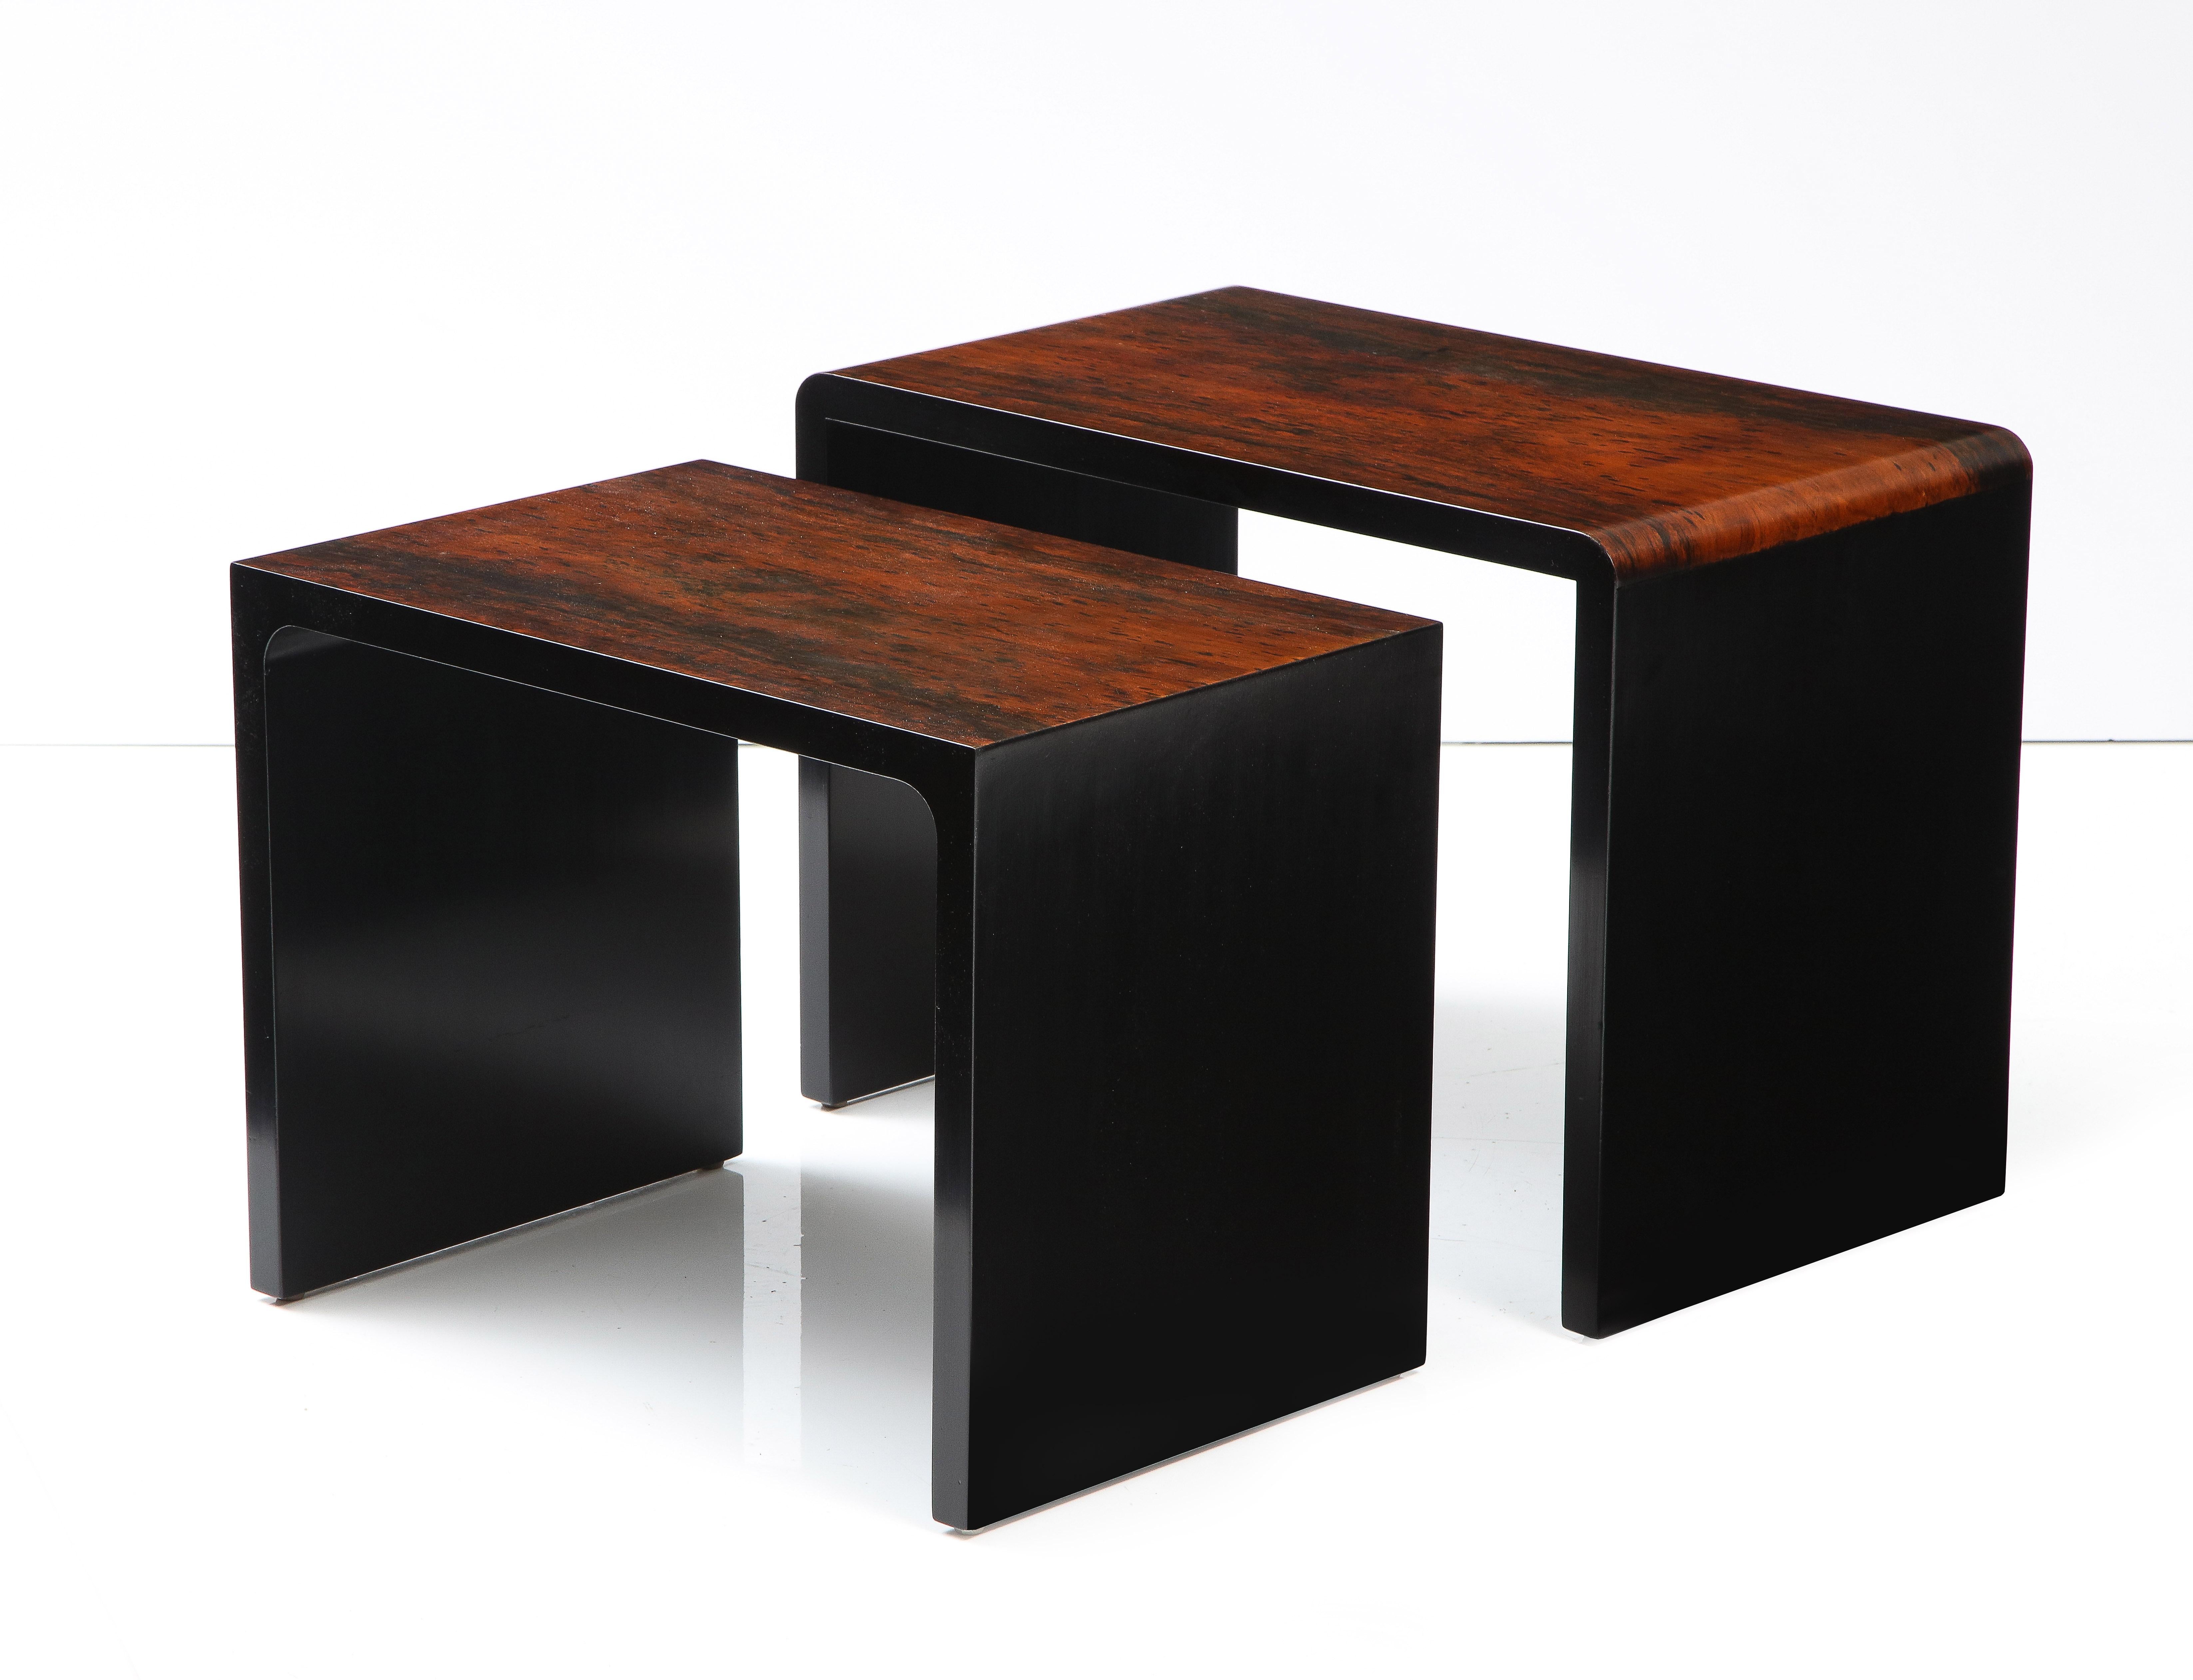 Set of two lacquered rosewood and ebony waterfall nesting tables. Highly polished and glamourous these pieces are indicative of the Italian chic of the 1970's. The contrast of the two woods is stunning, the craftsmanship superb. 
Italy, circa 1970